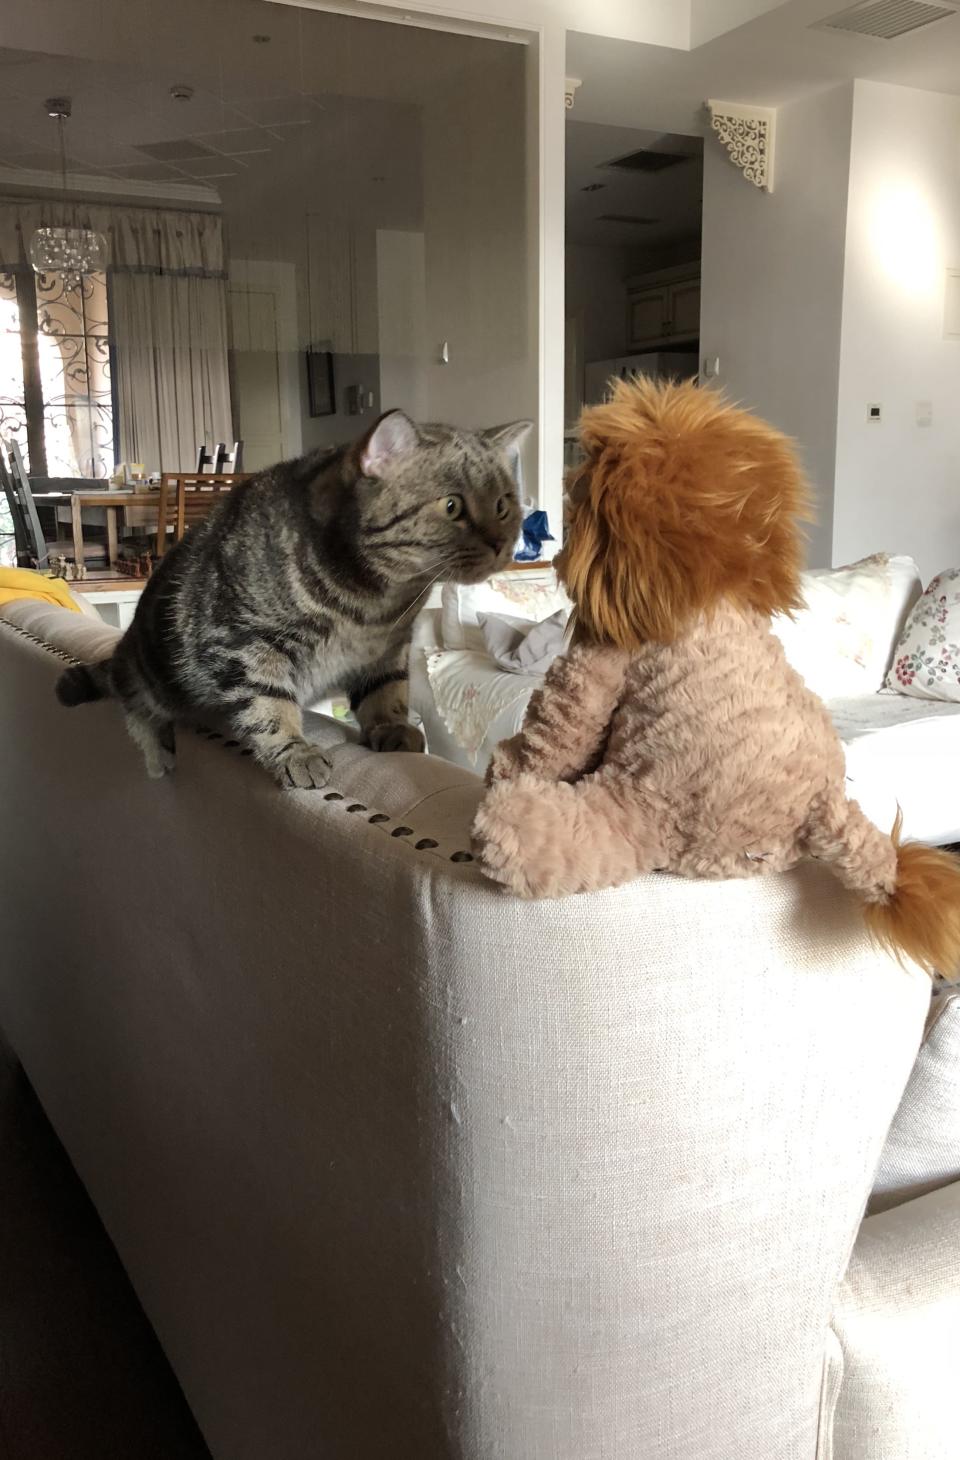 A cat appears perplexed by a stuffed animal